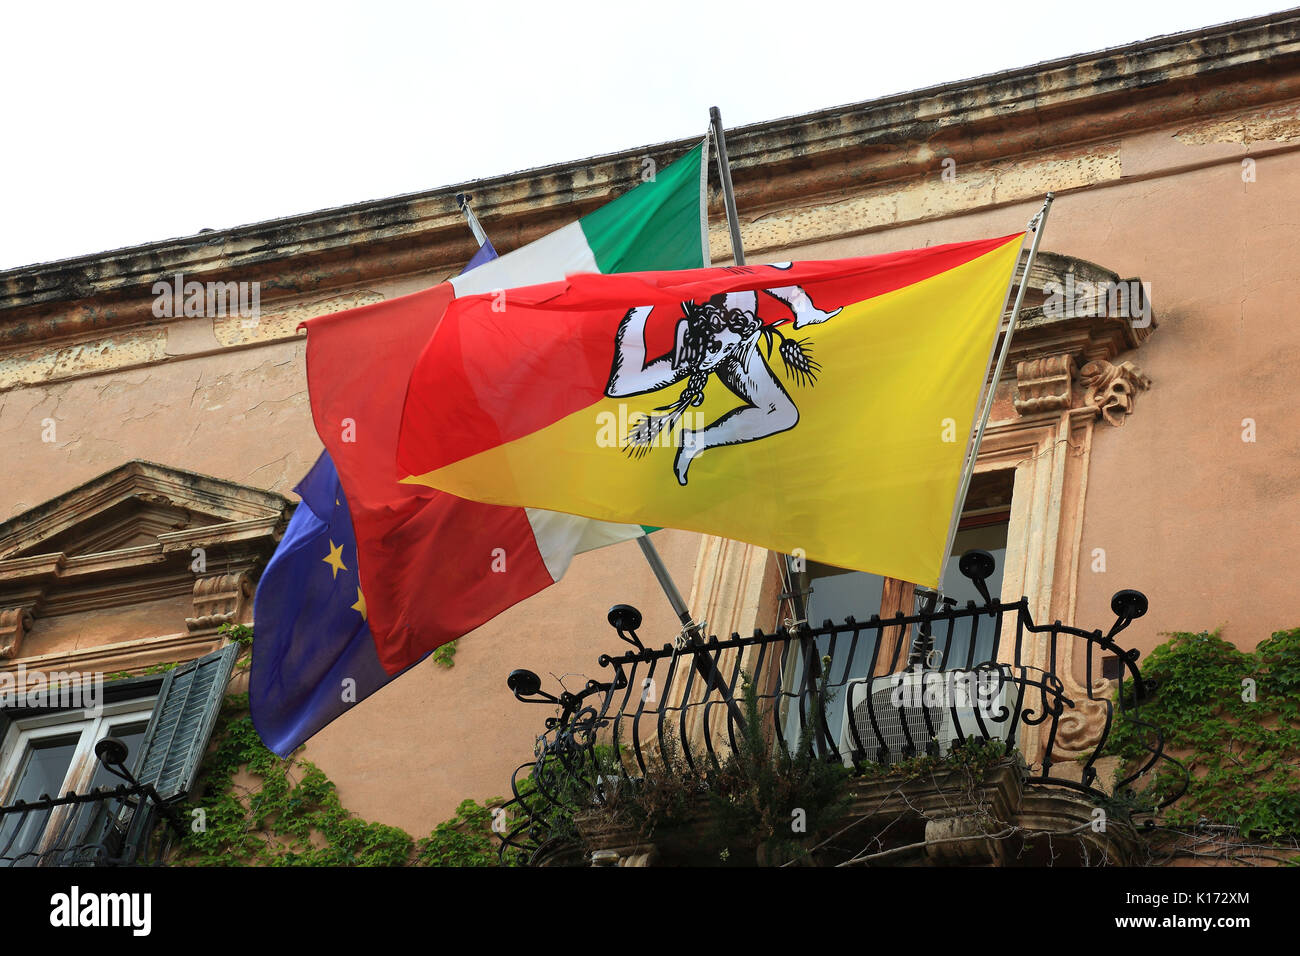 Sicily, in the old town of Agrigento, in Piazza Piradello, Sicilian regional flag at the town hall, the Palazzo Comunale Stock Photo